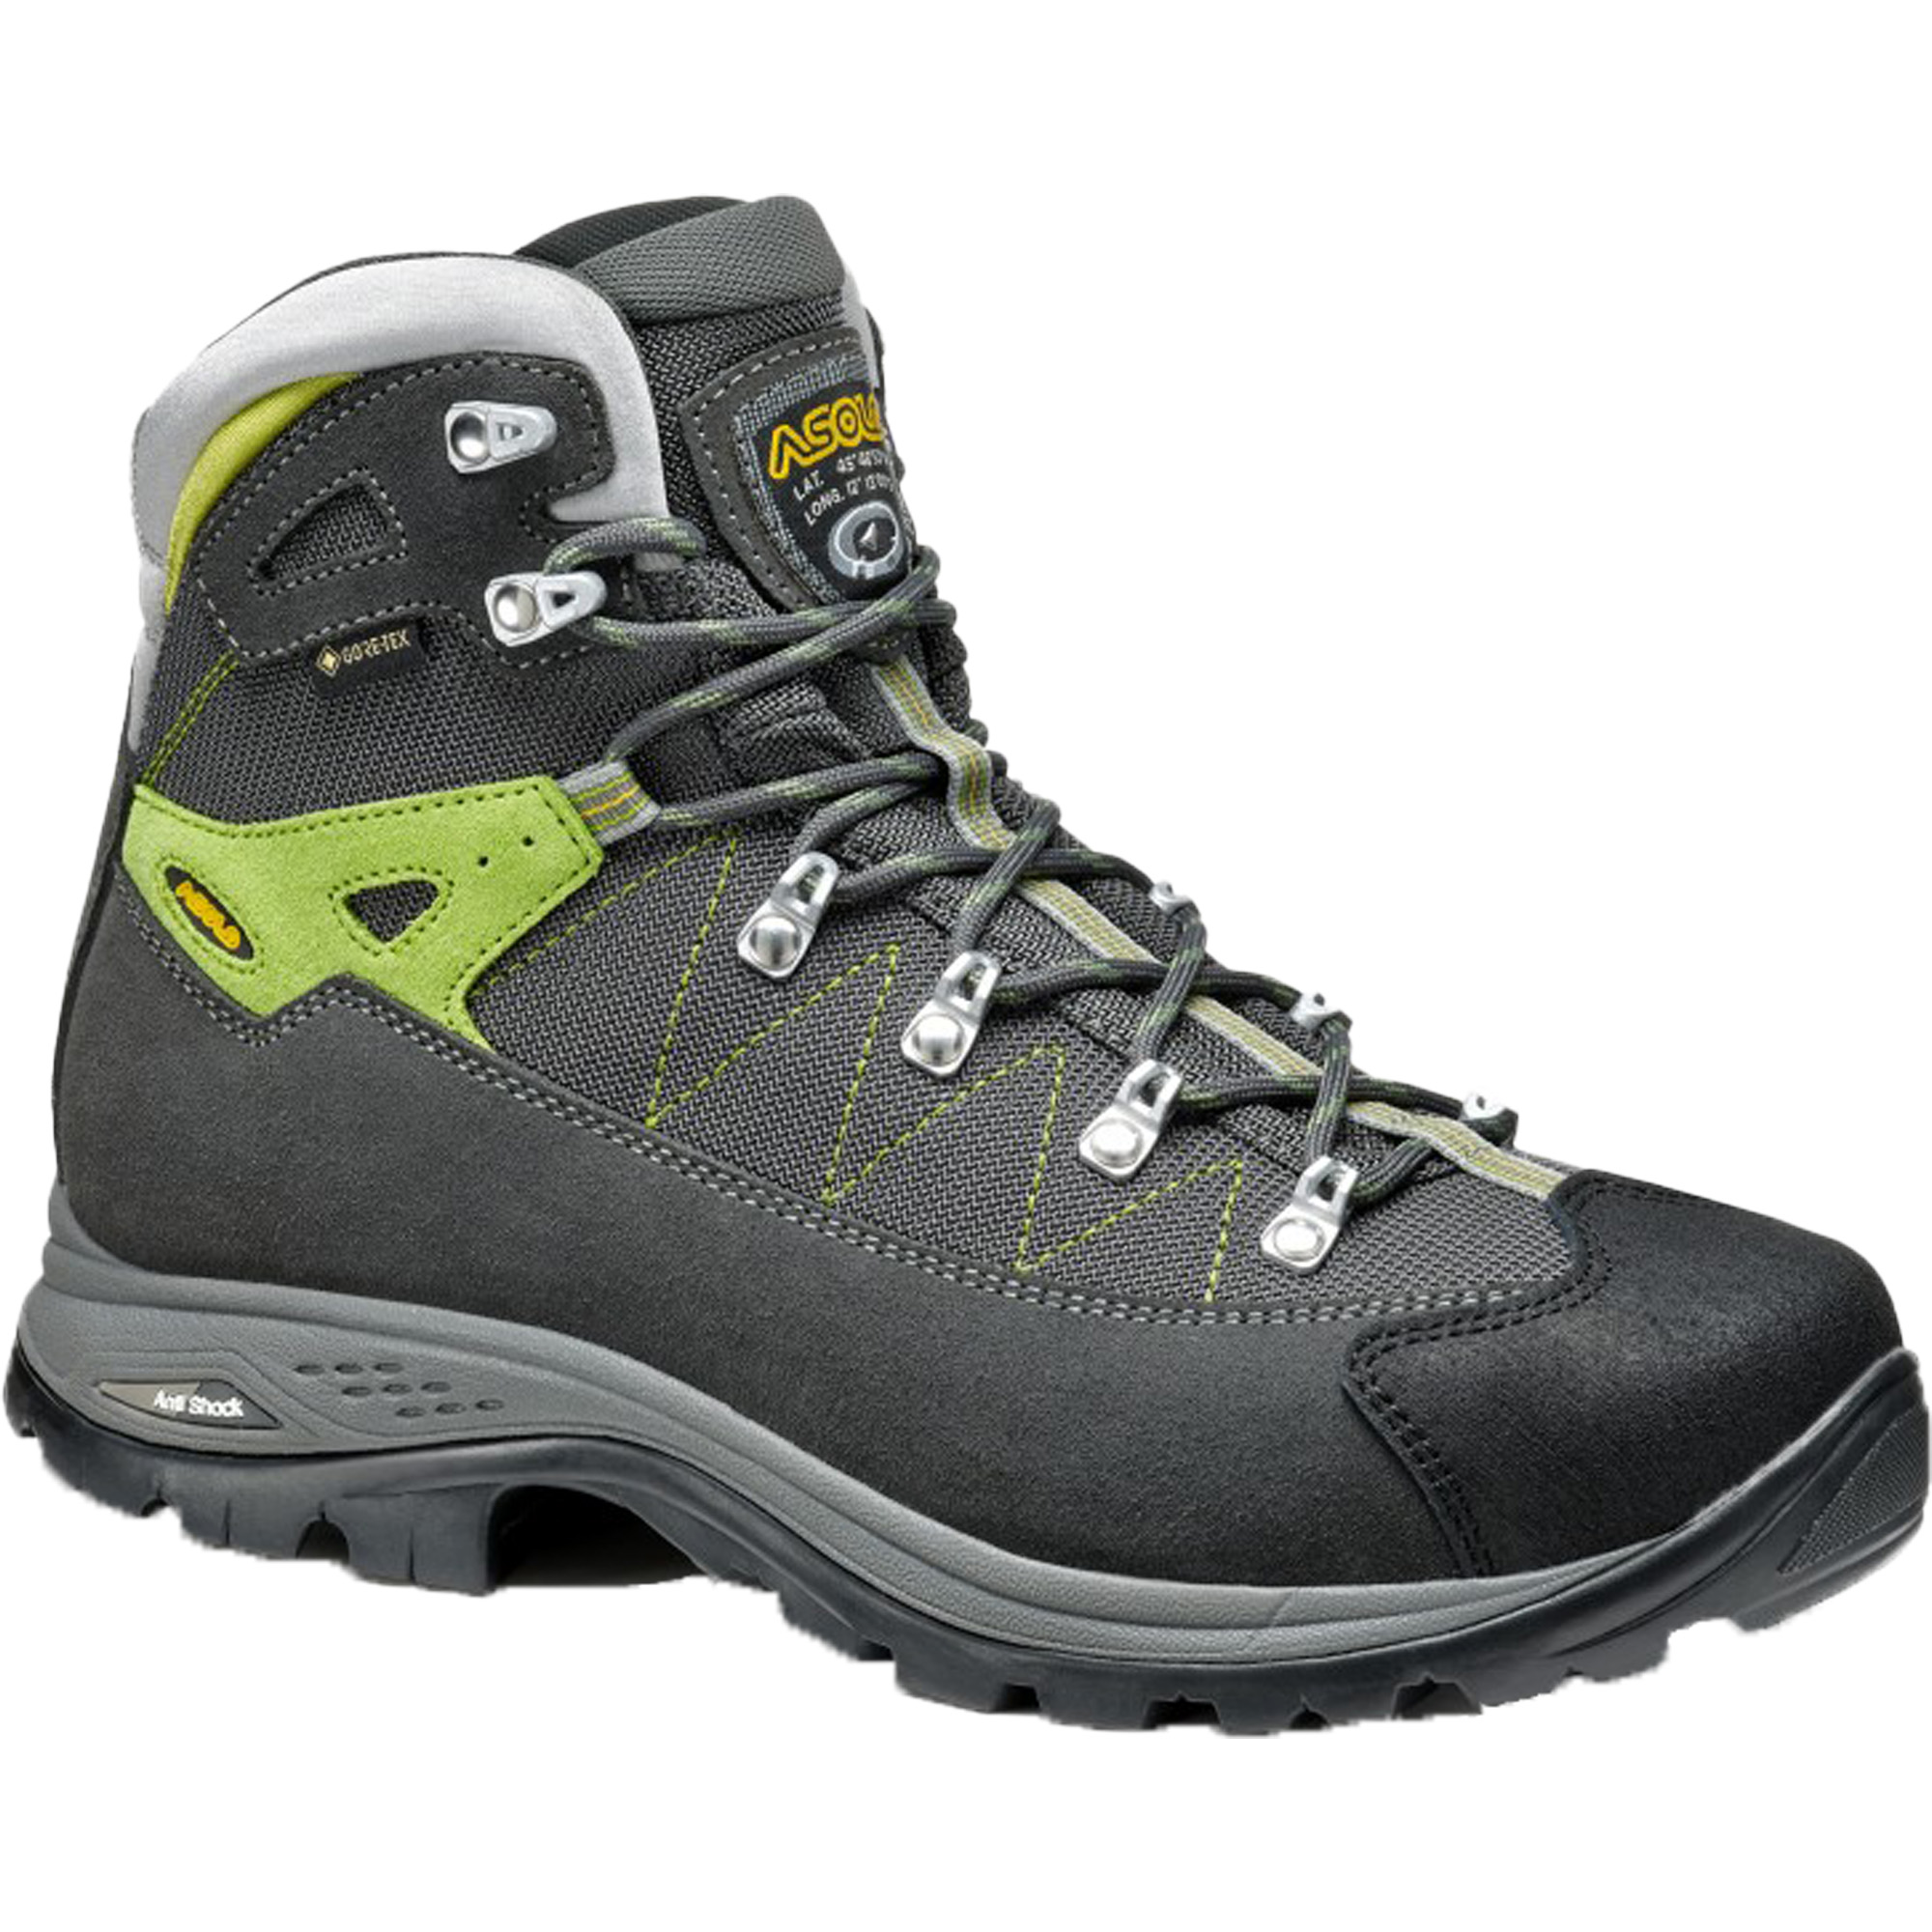 Asolo Finder GV Gore-Tex Hiking Boots, UK 12 Graphite/Green Lime